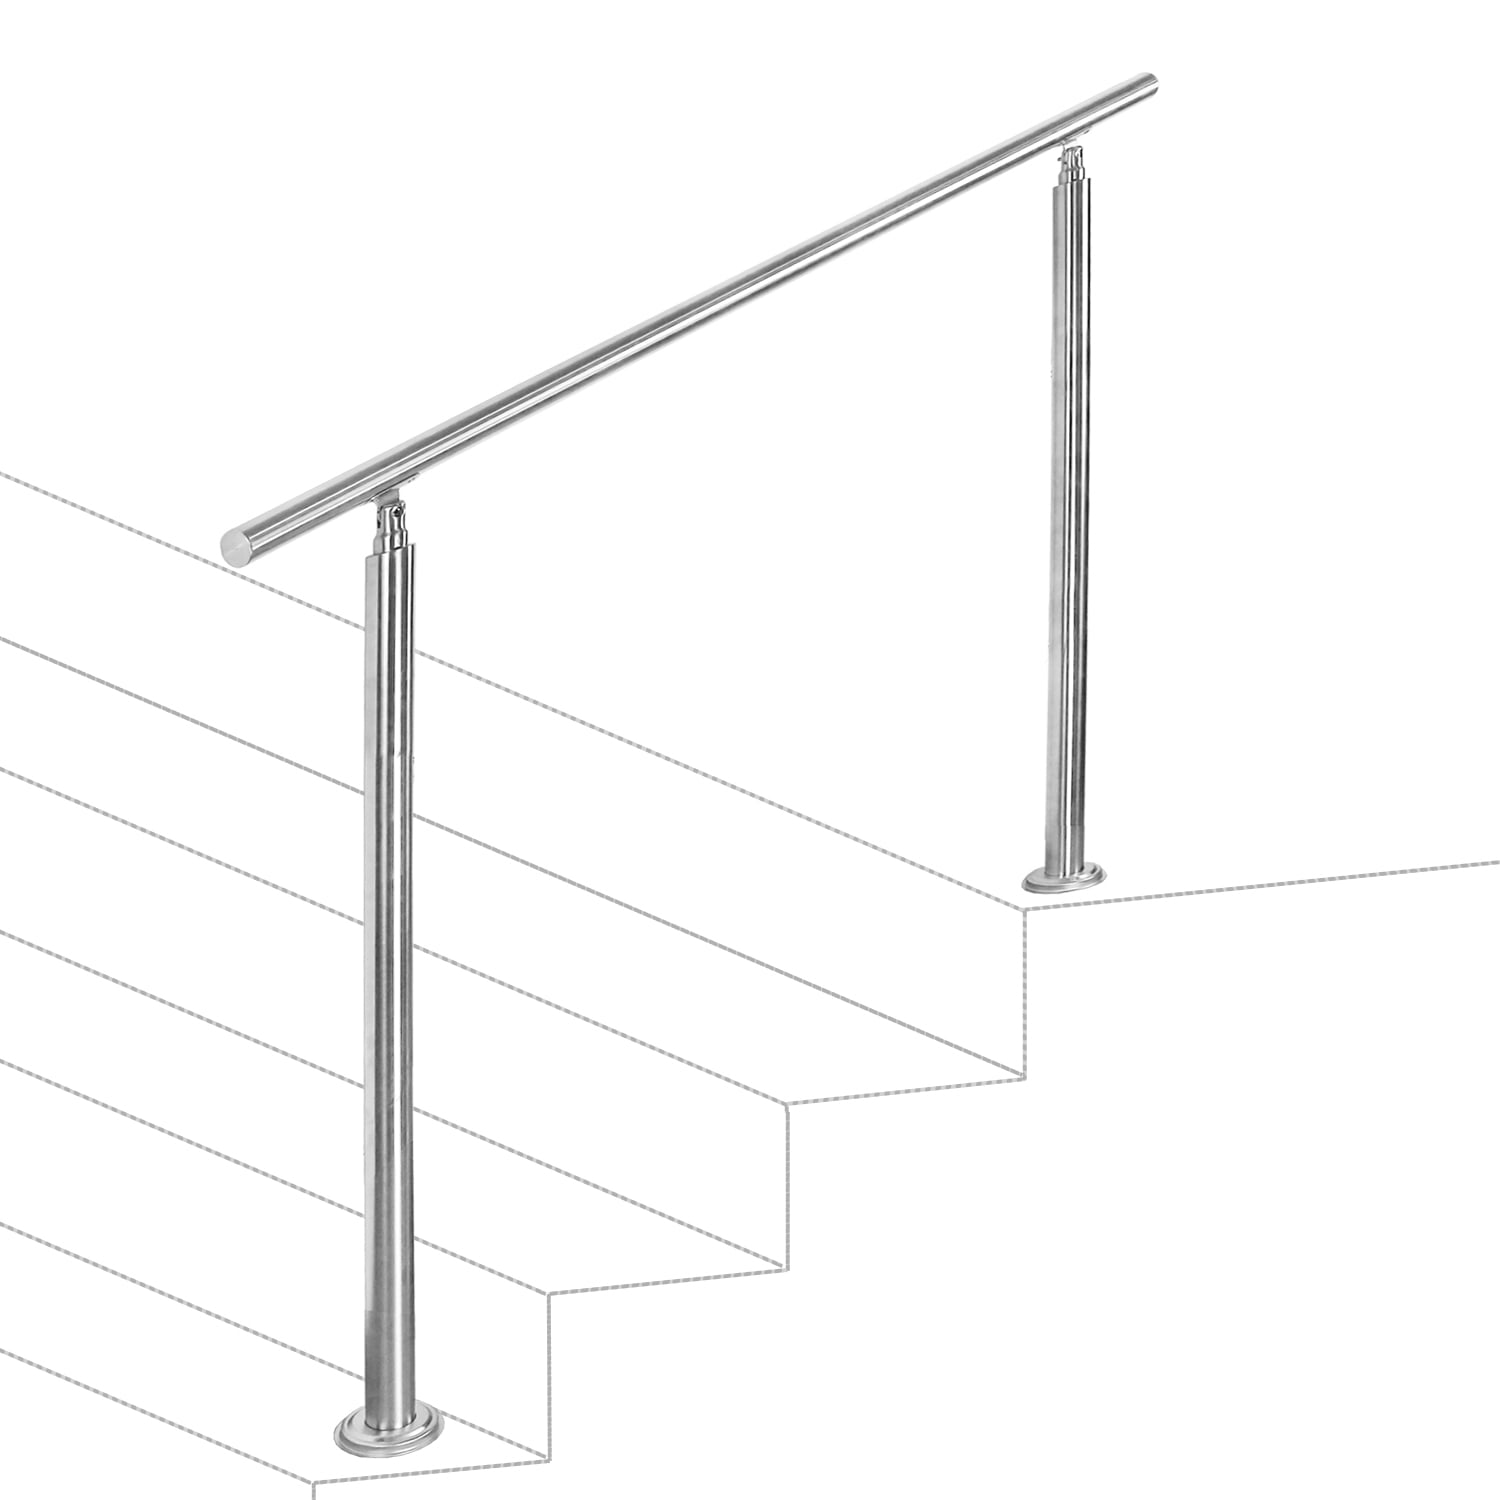 Teedor Handrails for Outdoor Steps, Stair Handrail Fits 6 to 7 Steps ...